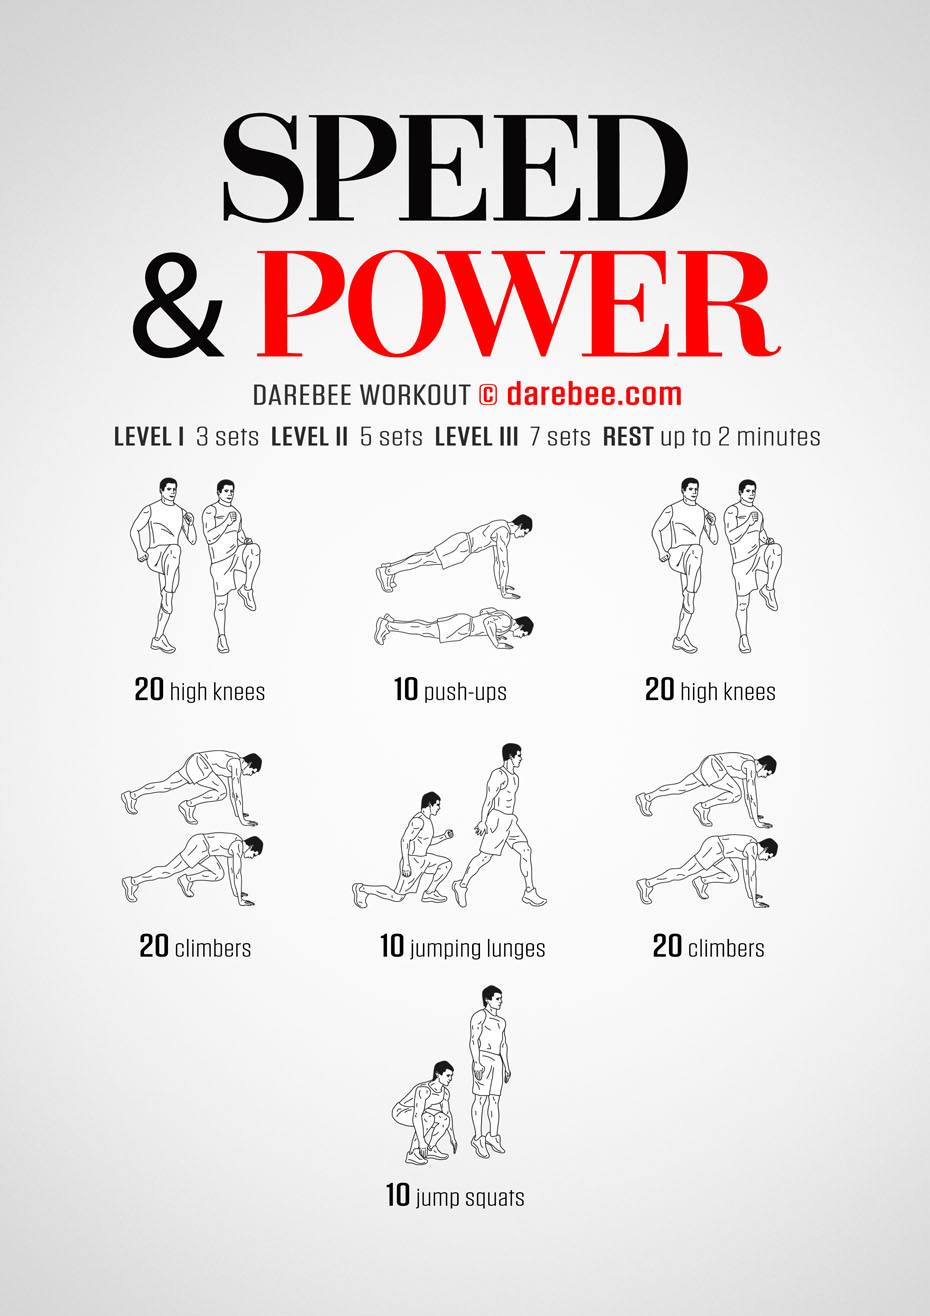 https://darebee.com/images/workouts/speed-and-power-workout.jpg